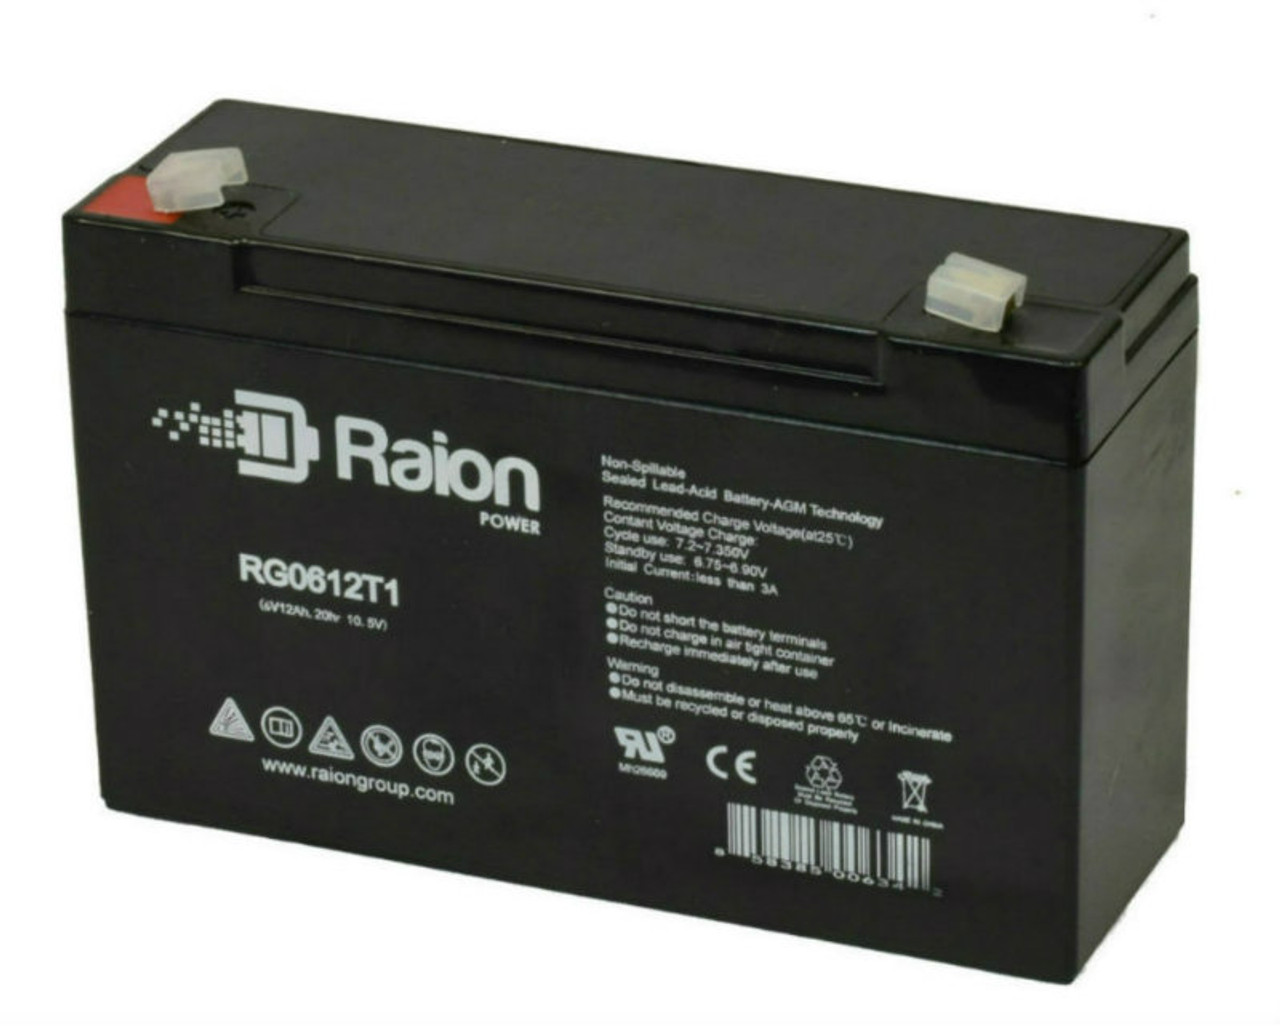 Raion Power RG06120T1 Replacement 6V 12Ah Emergency Light Battery for Holophane M47CH